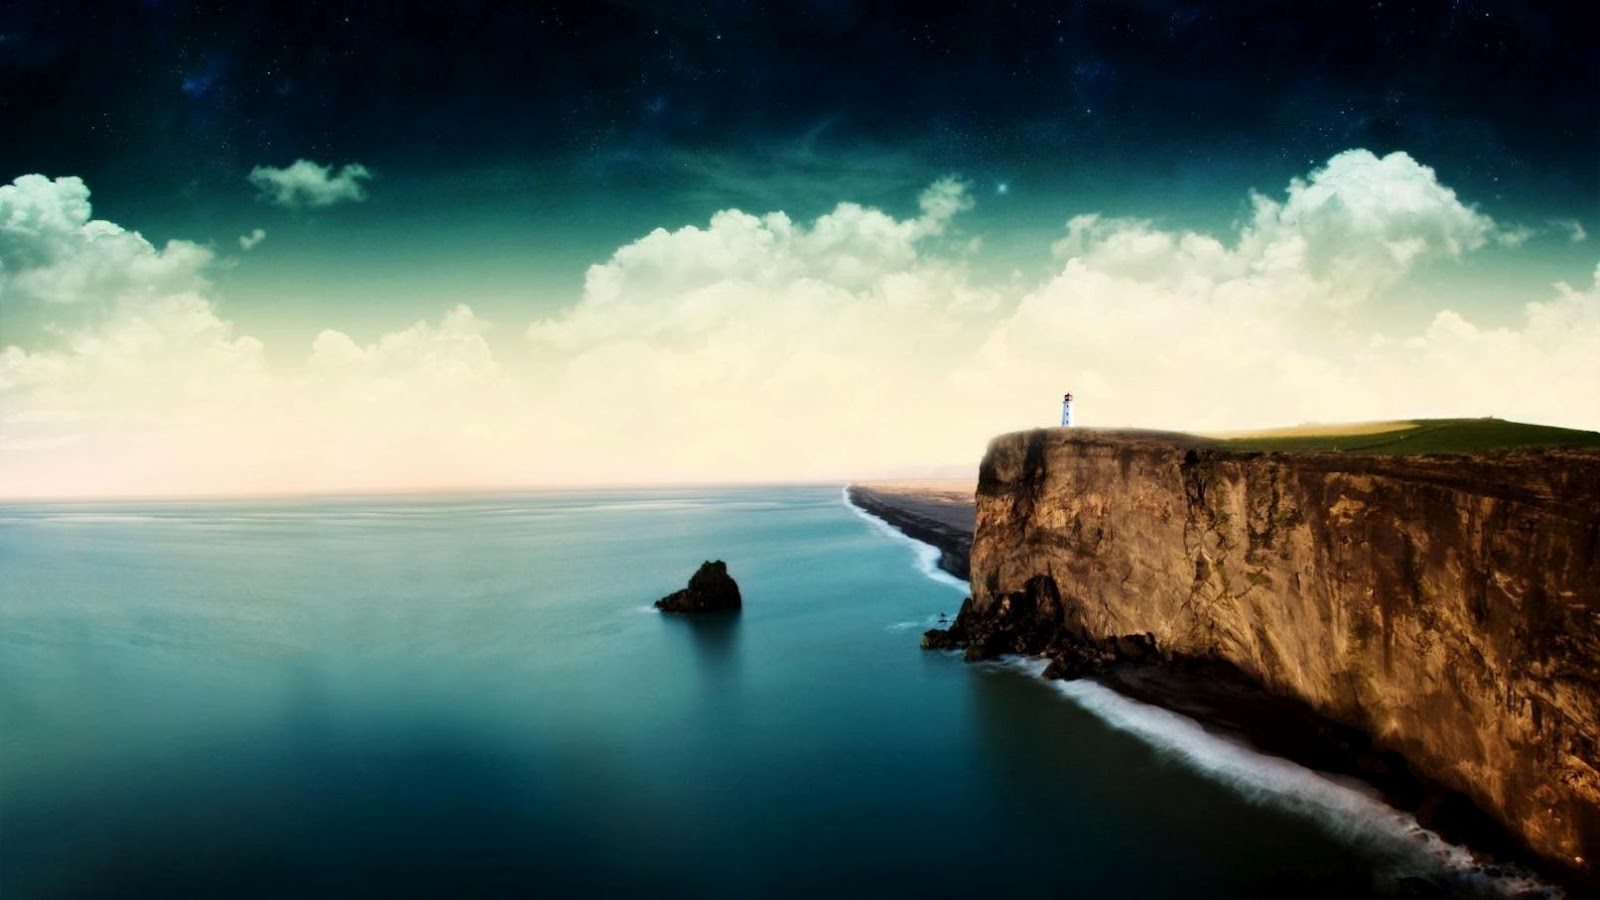 Landscape Ocean Cliff HD Wallpaper Is A Great For Your